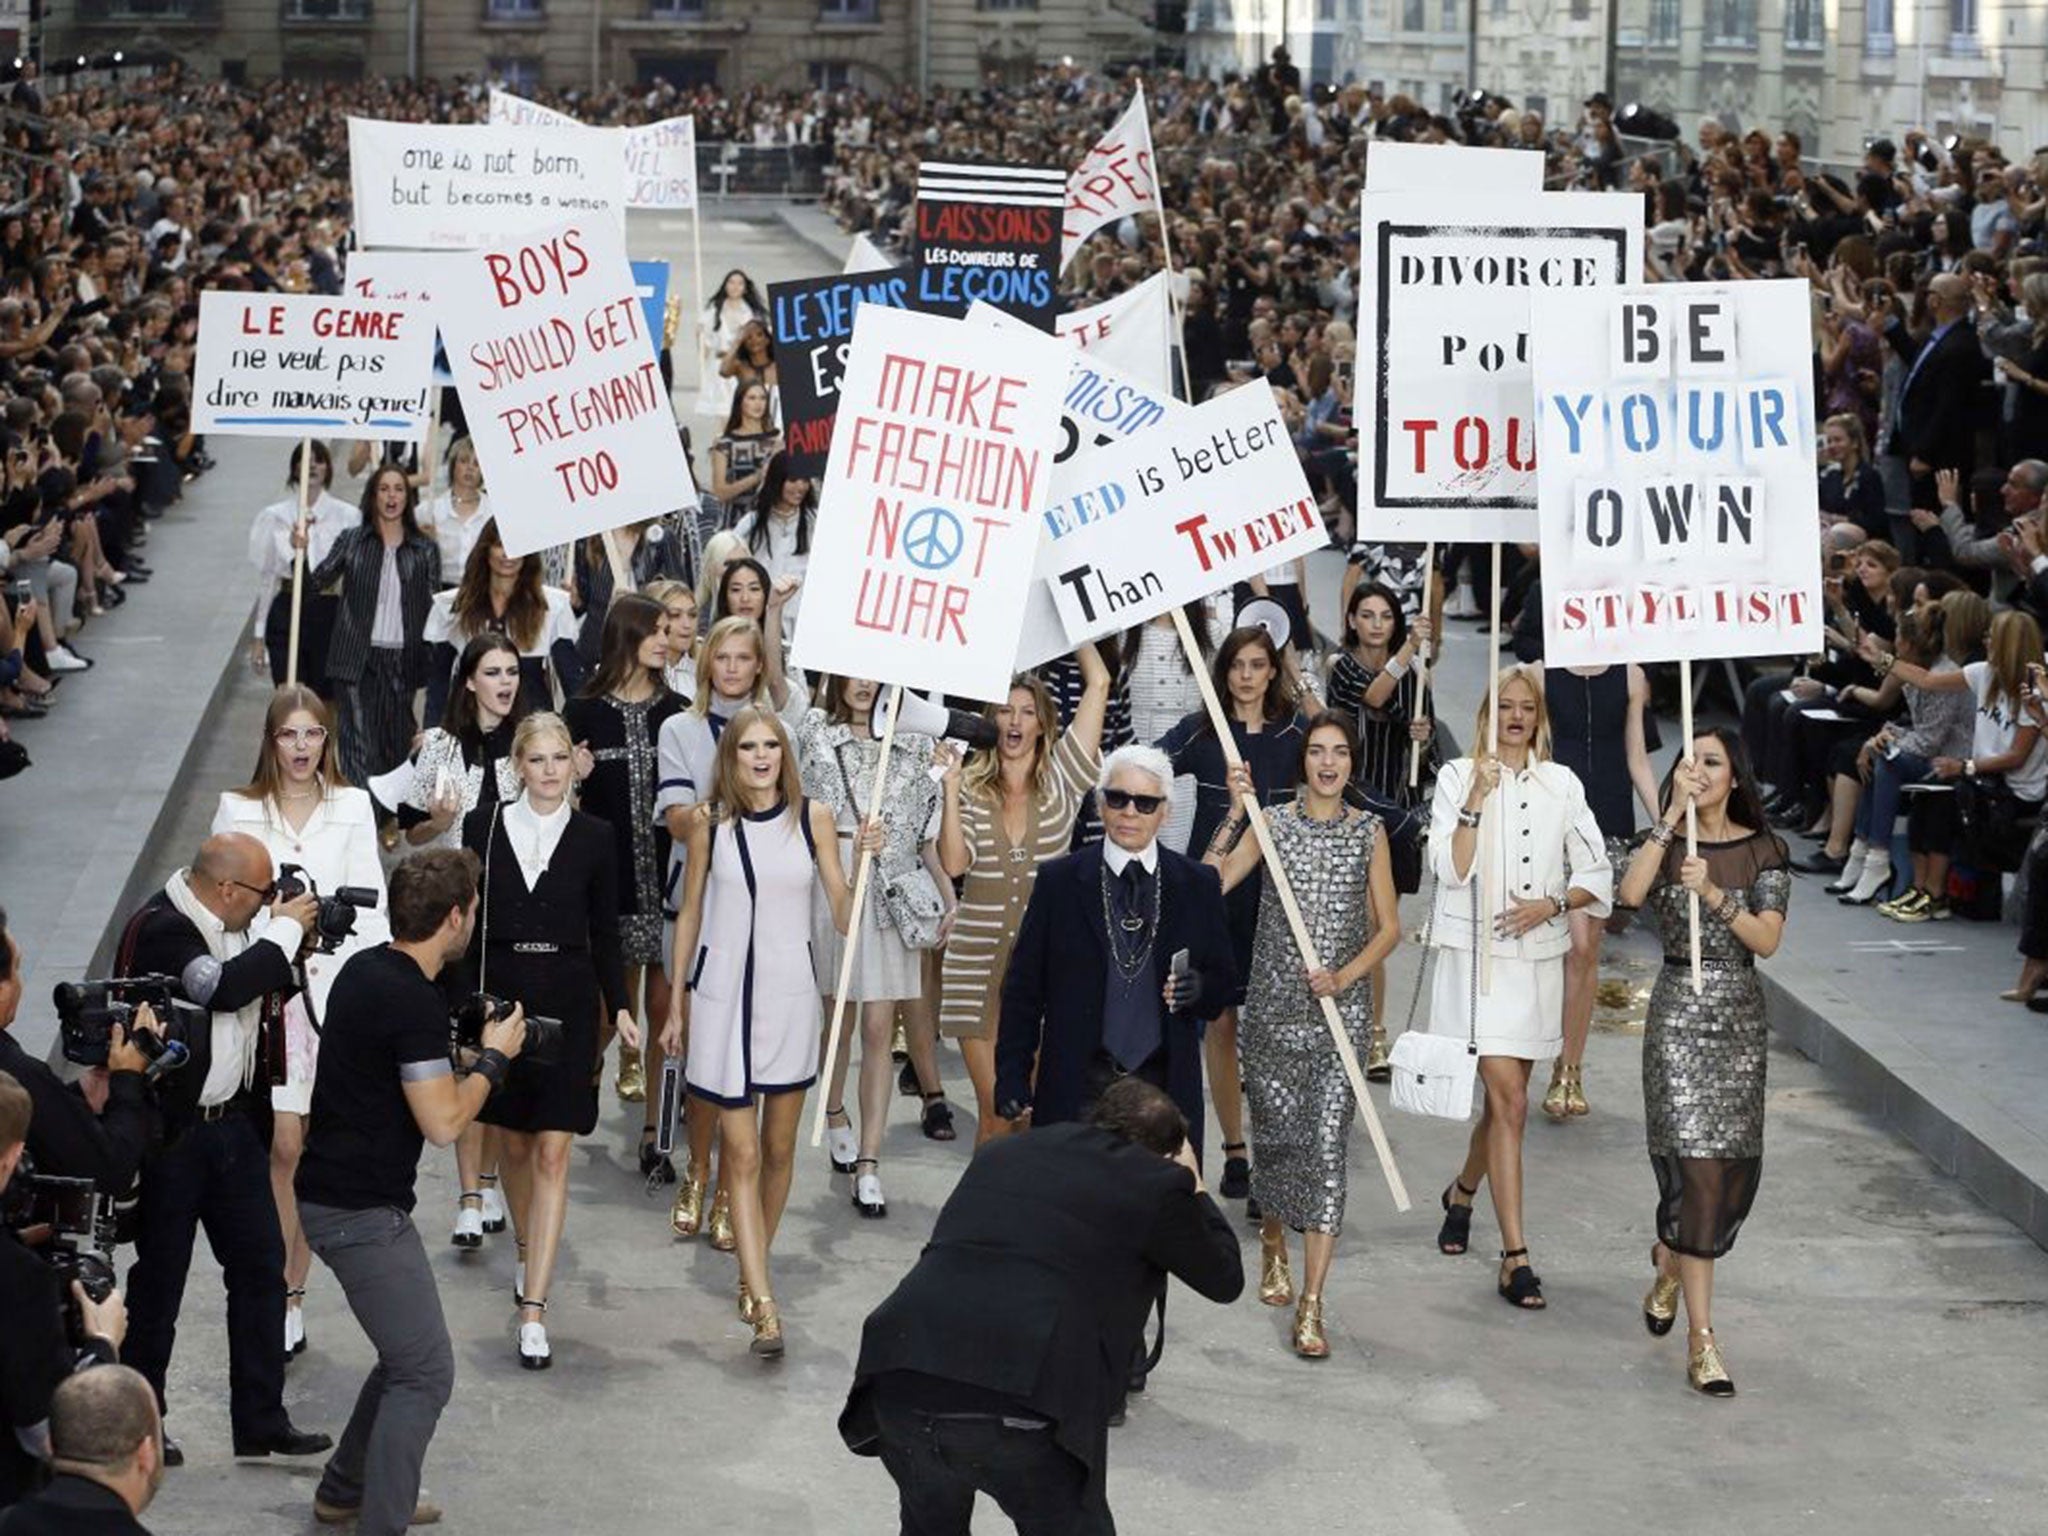 Karl Lagerfeld's latest Chanel show might have dressed itself up